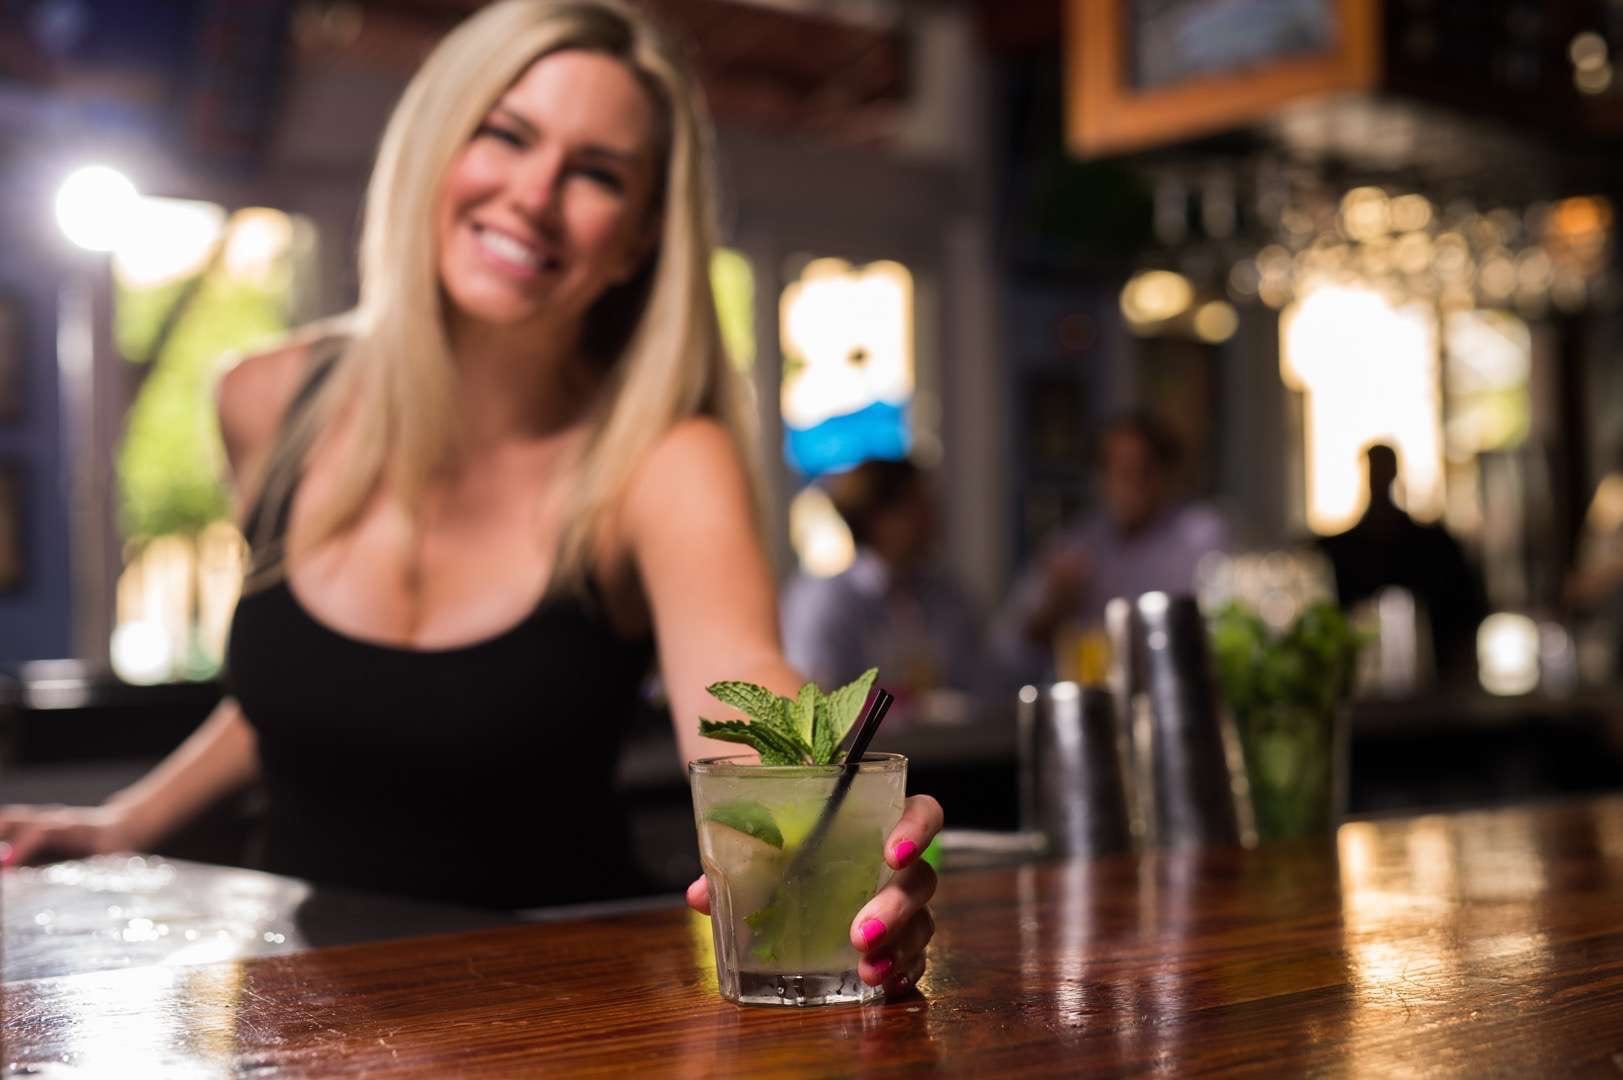 CI Studios Portfolio The Restaurant People Woman with short blond hair in a black crop top smiling and posing with an alcoholic beverage with mint leaves